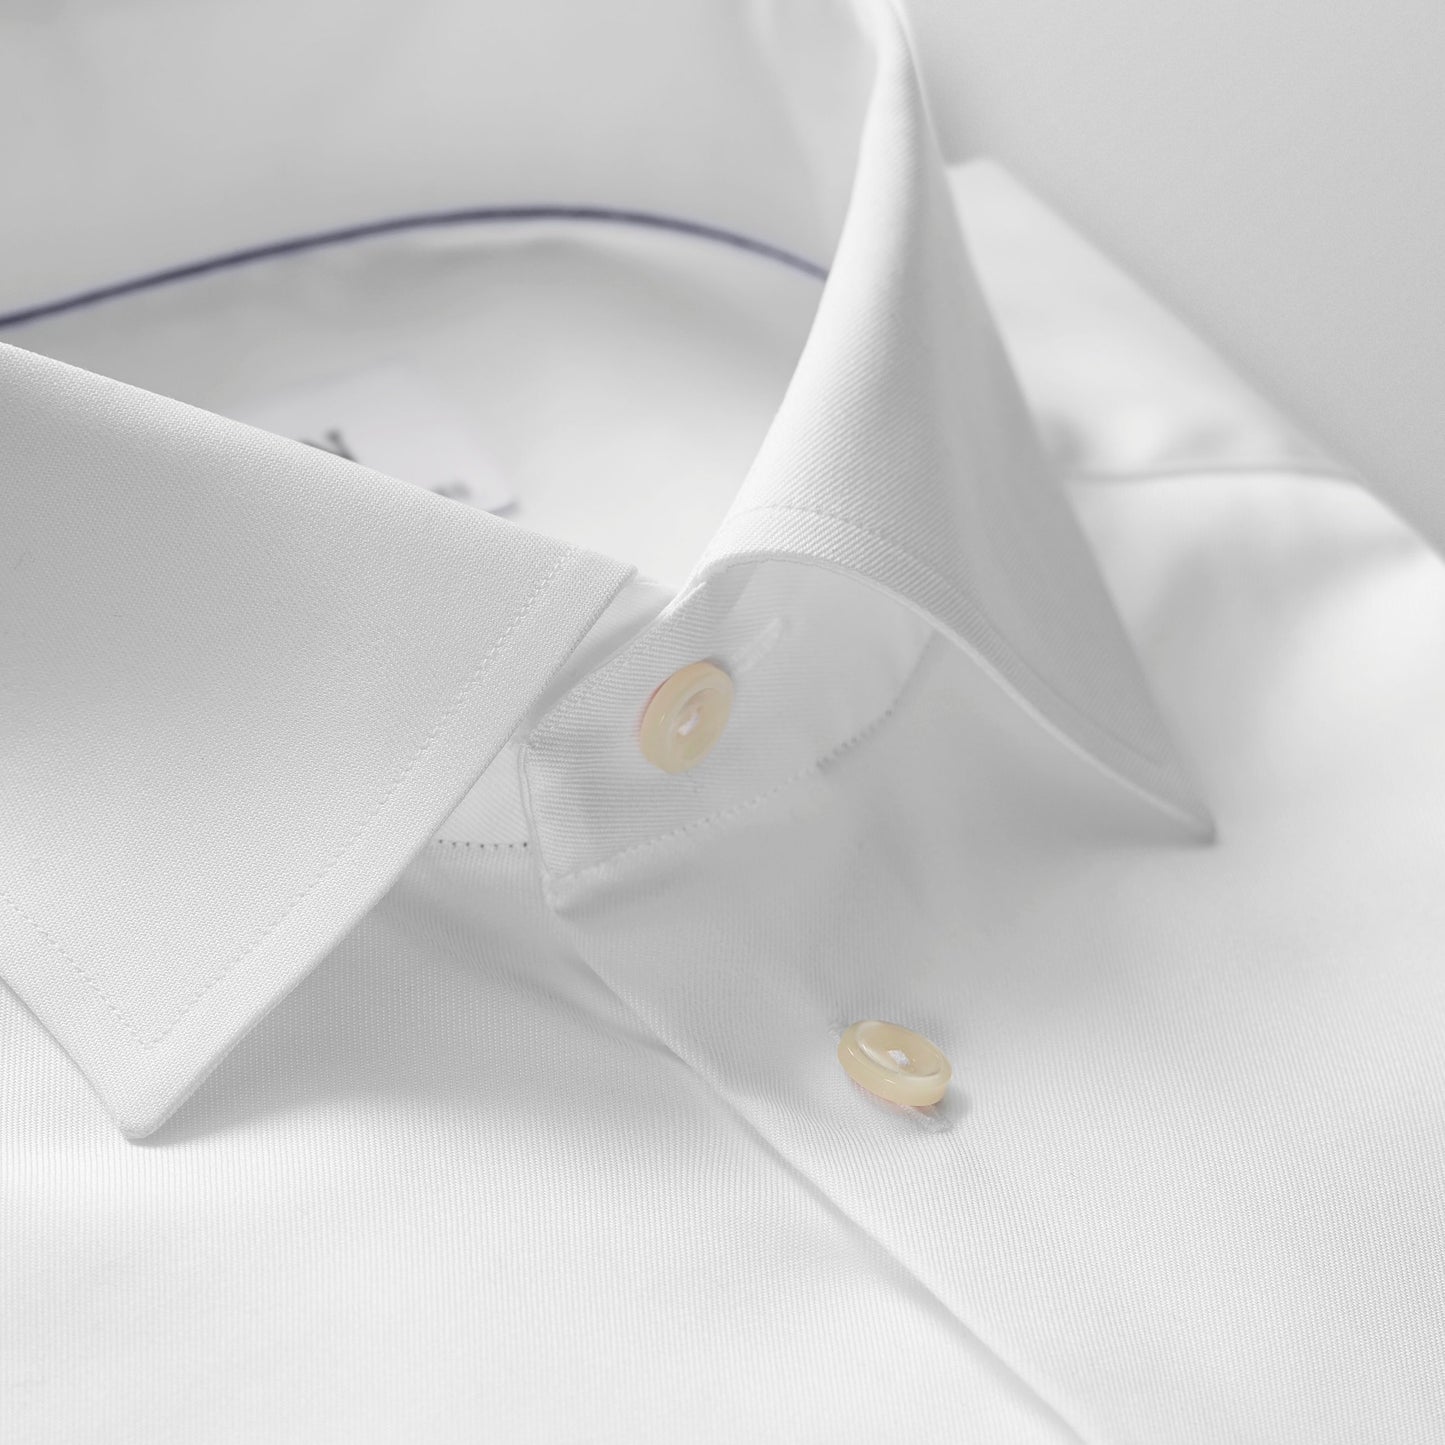 Eton L/S Business Shirt - Signature Twill in Contemporary Fit